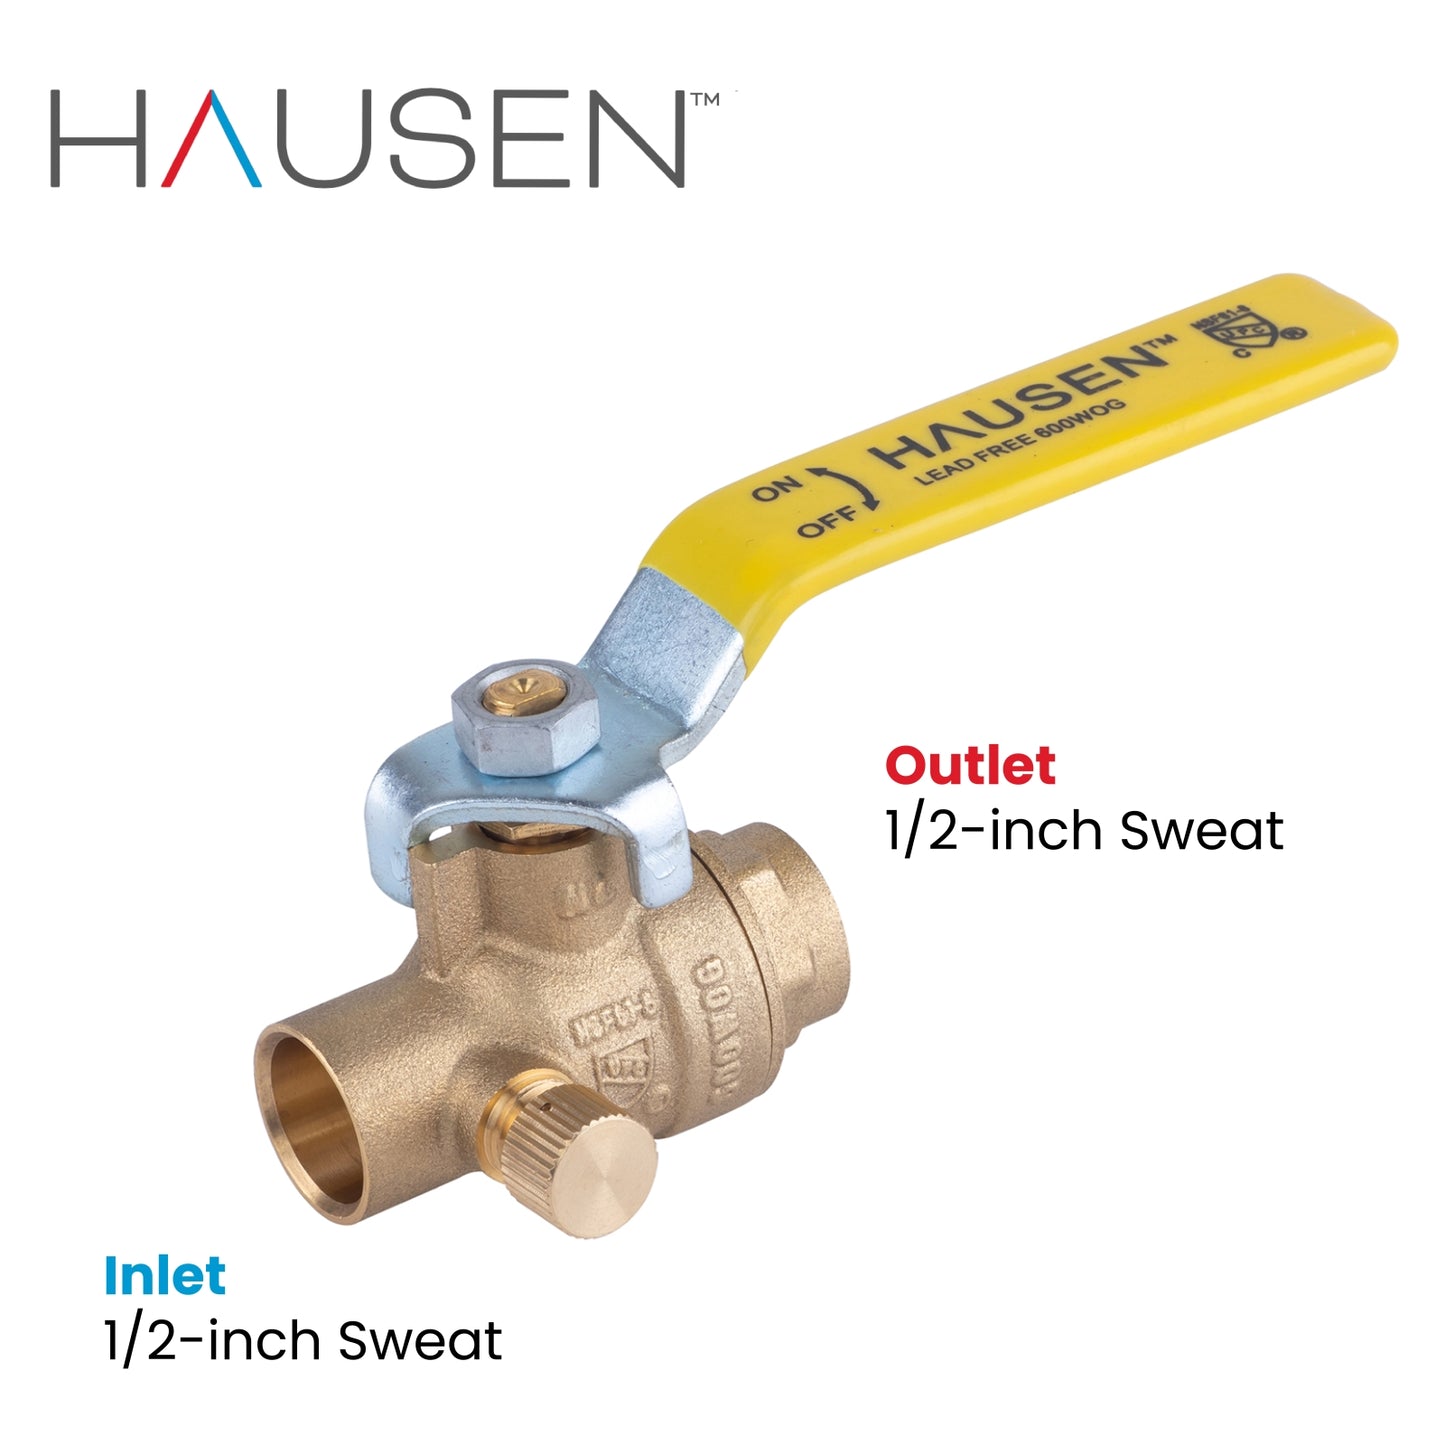 Hausen 1/2-inch Sweat x 1/2-inch Sweat Full Port Brass Ball Valve with Drain; Lead Free Forged Brass; Blowout Resistant Stem; For Use in Potable Water, Oil and Gas Distribution Systems, 5-Pack